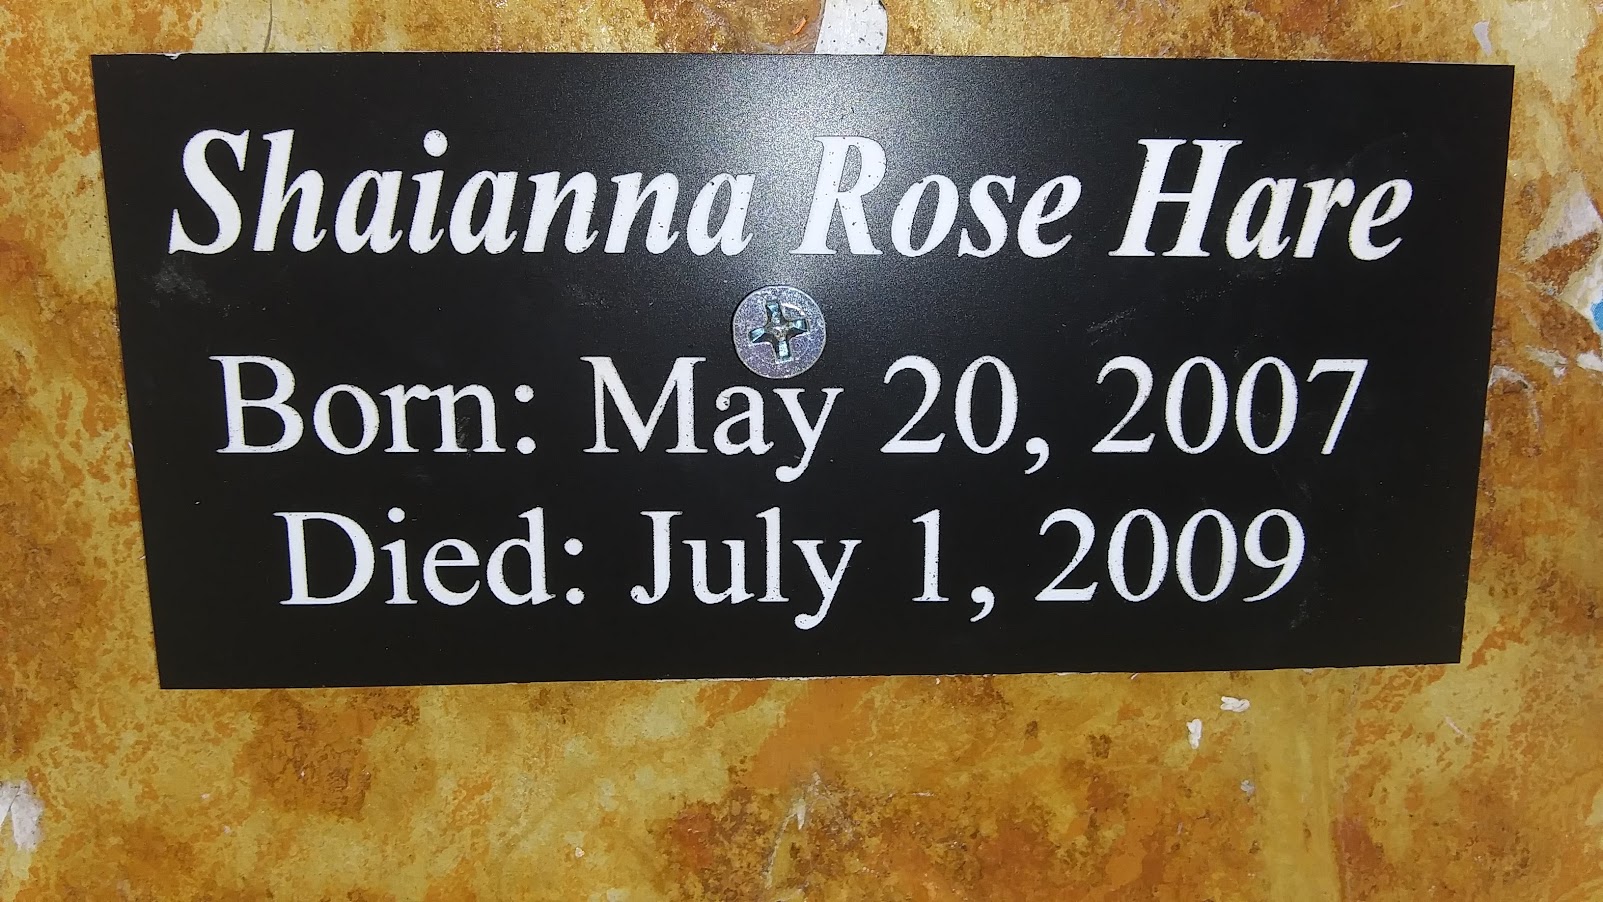 Headstone for Hare, Shaianna Rose